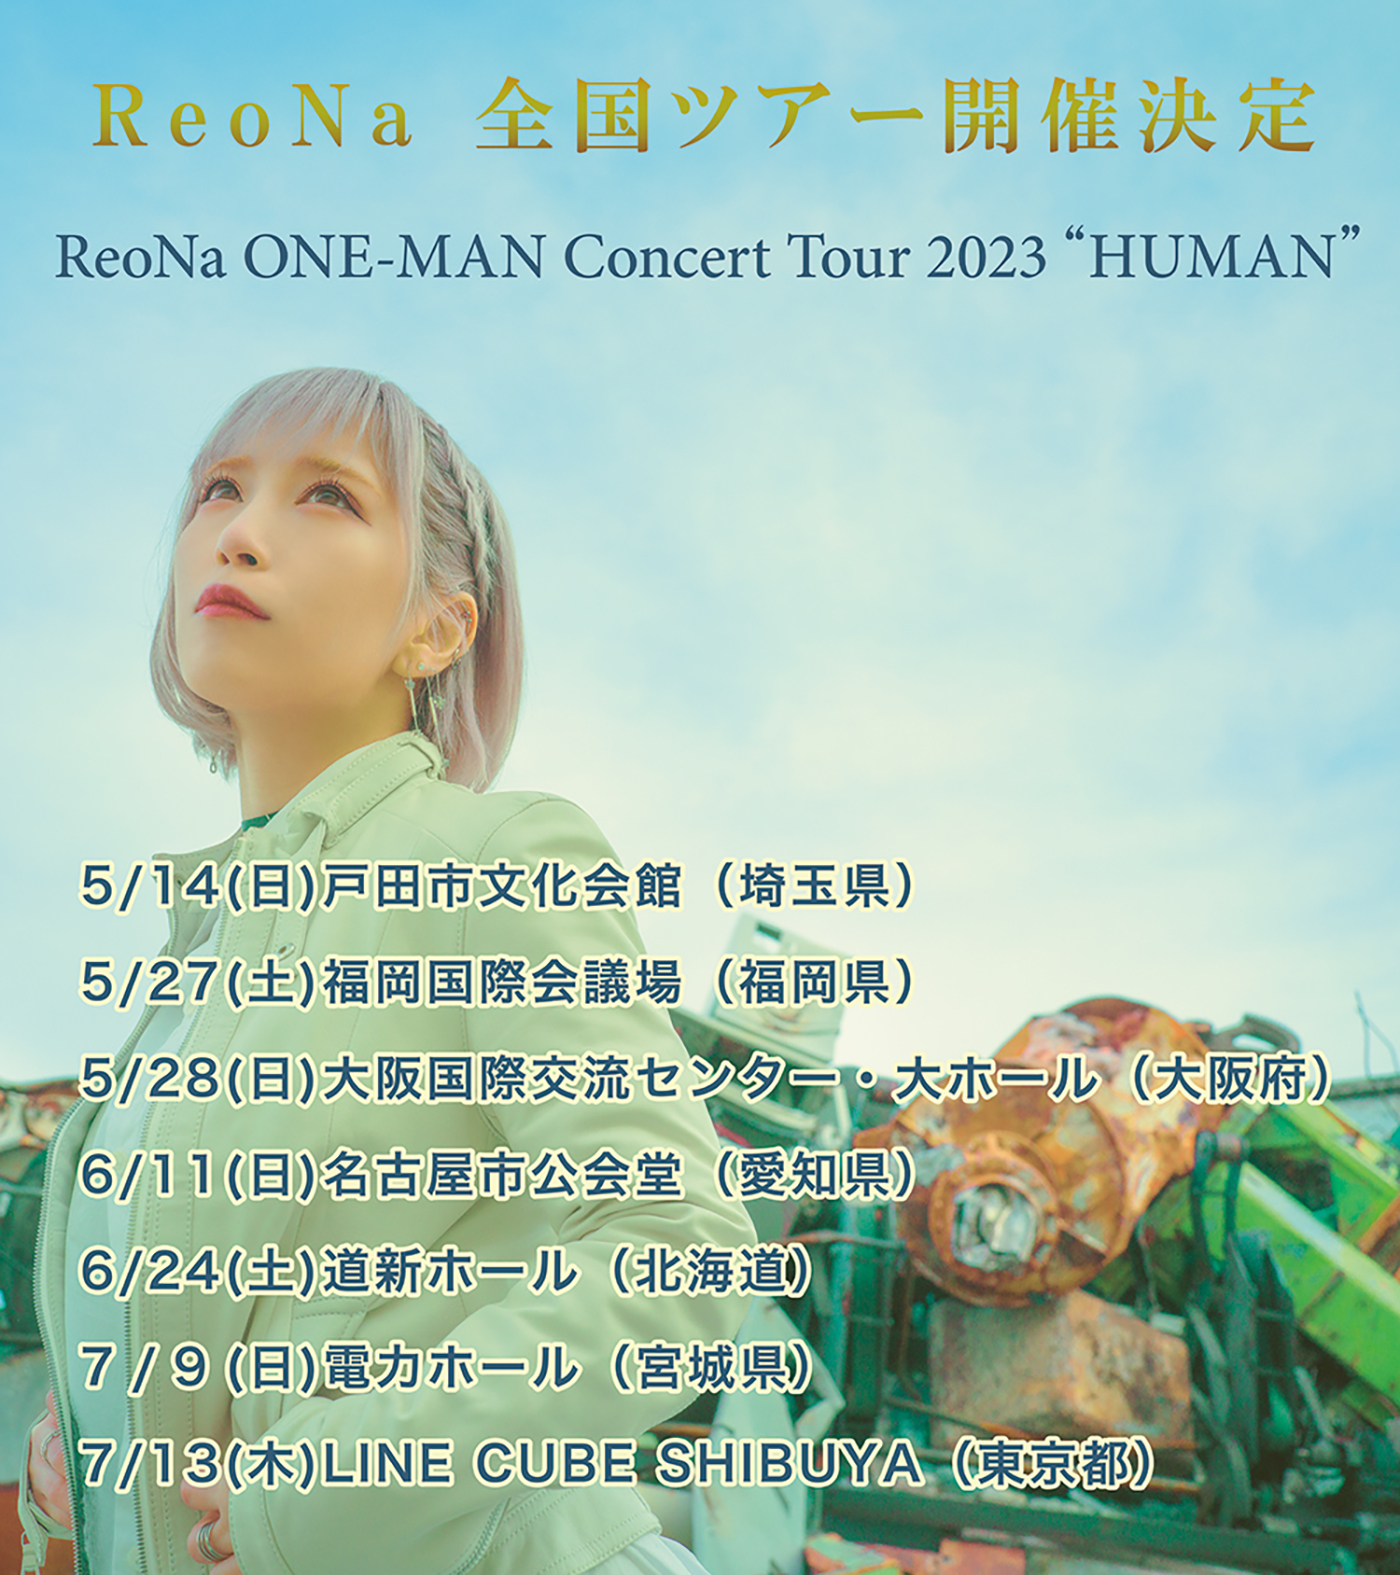 ReoNa、全国ツアー『ReoNa ONE-MAN Concert Tour 2023 “HUMAN”』開催決定 - 画像一覧（4/4）